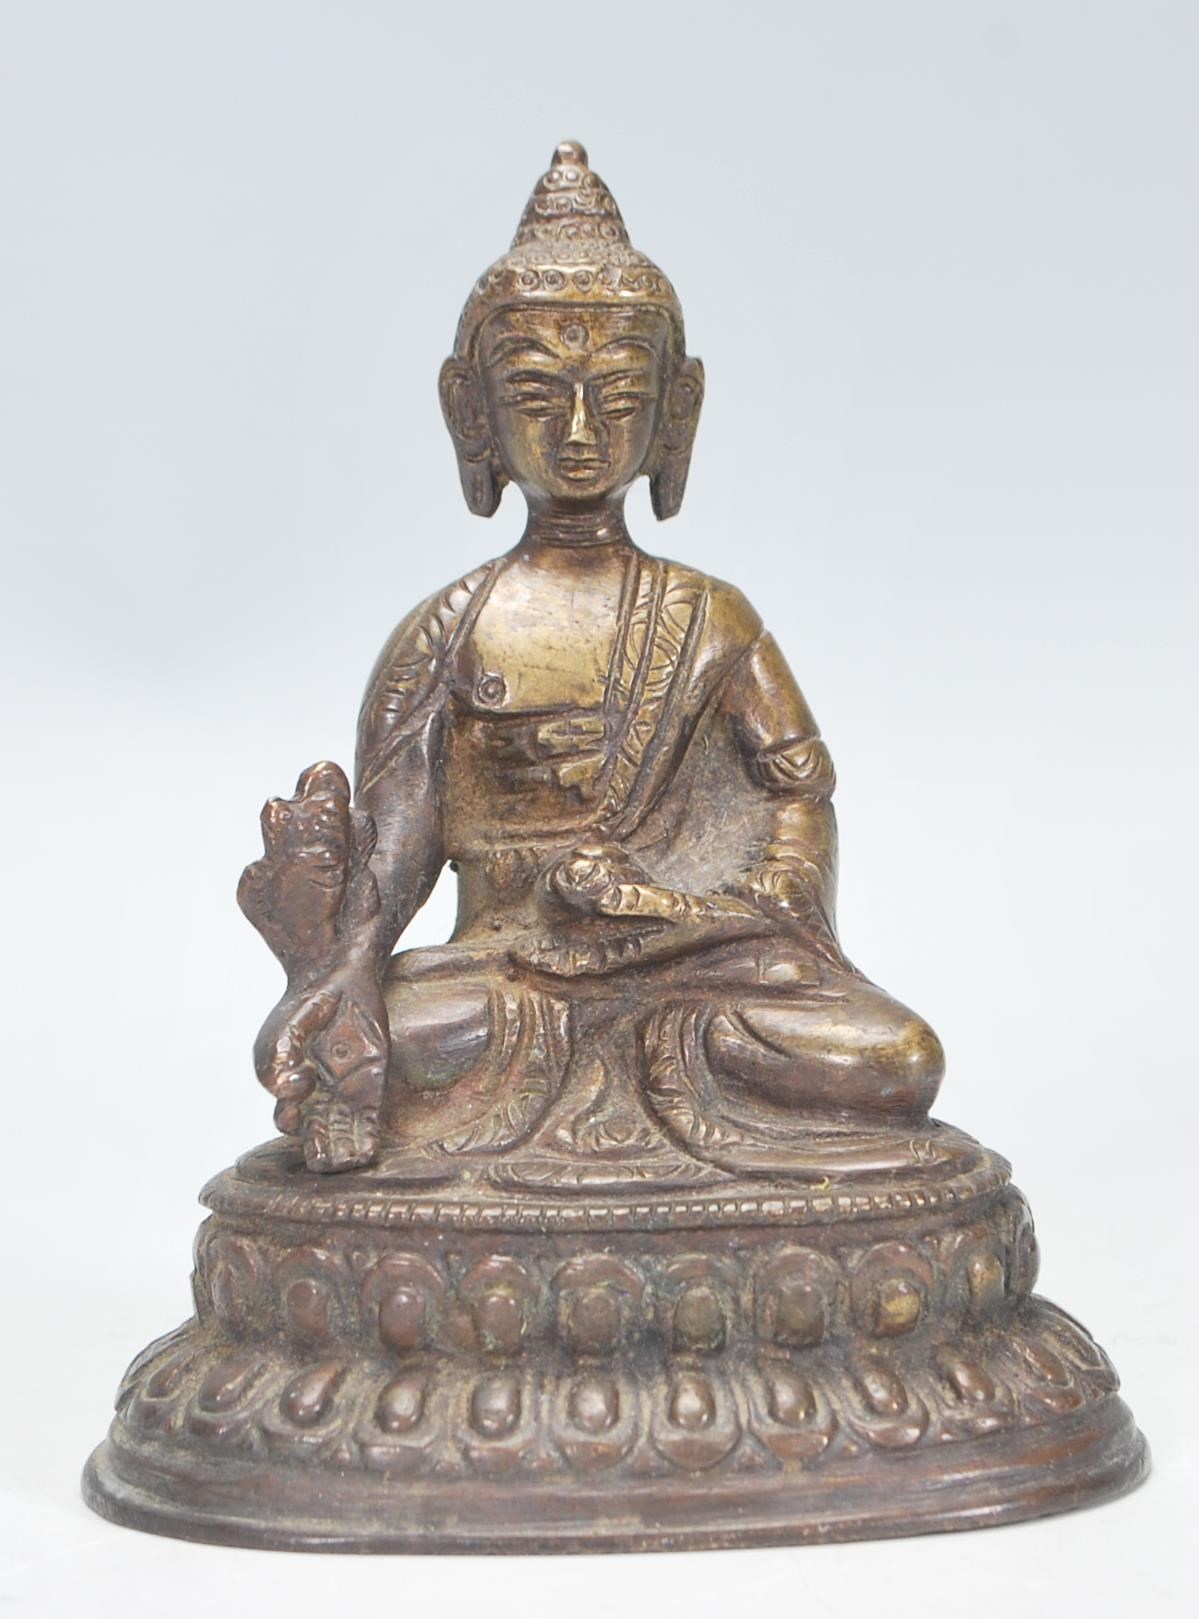 An Indian bronze figurine / ornament in the form of Buddha, modelled in a seated position raised